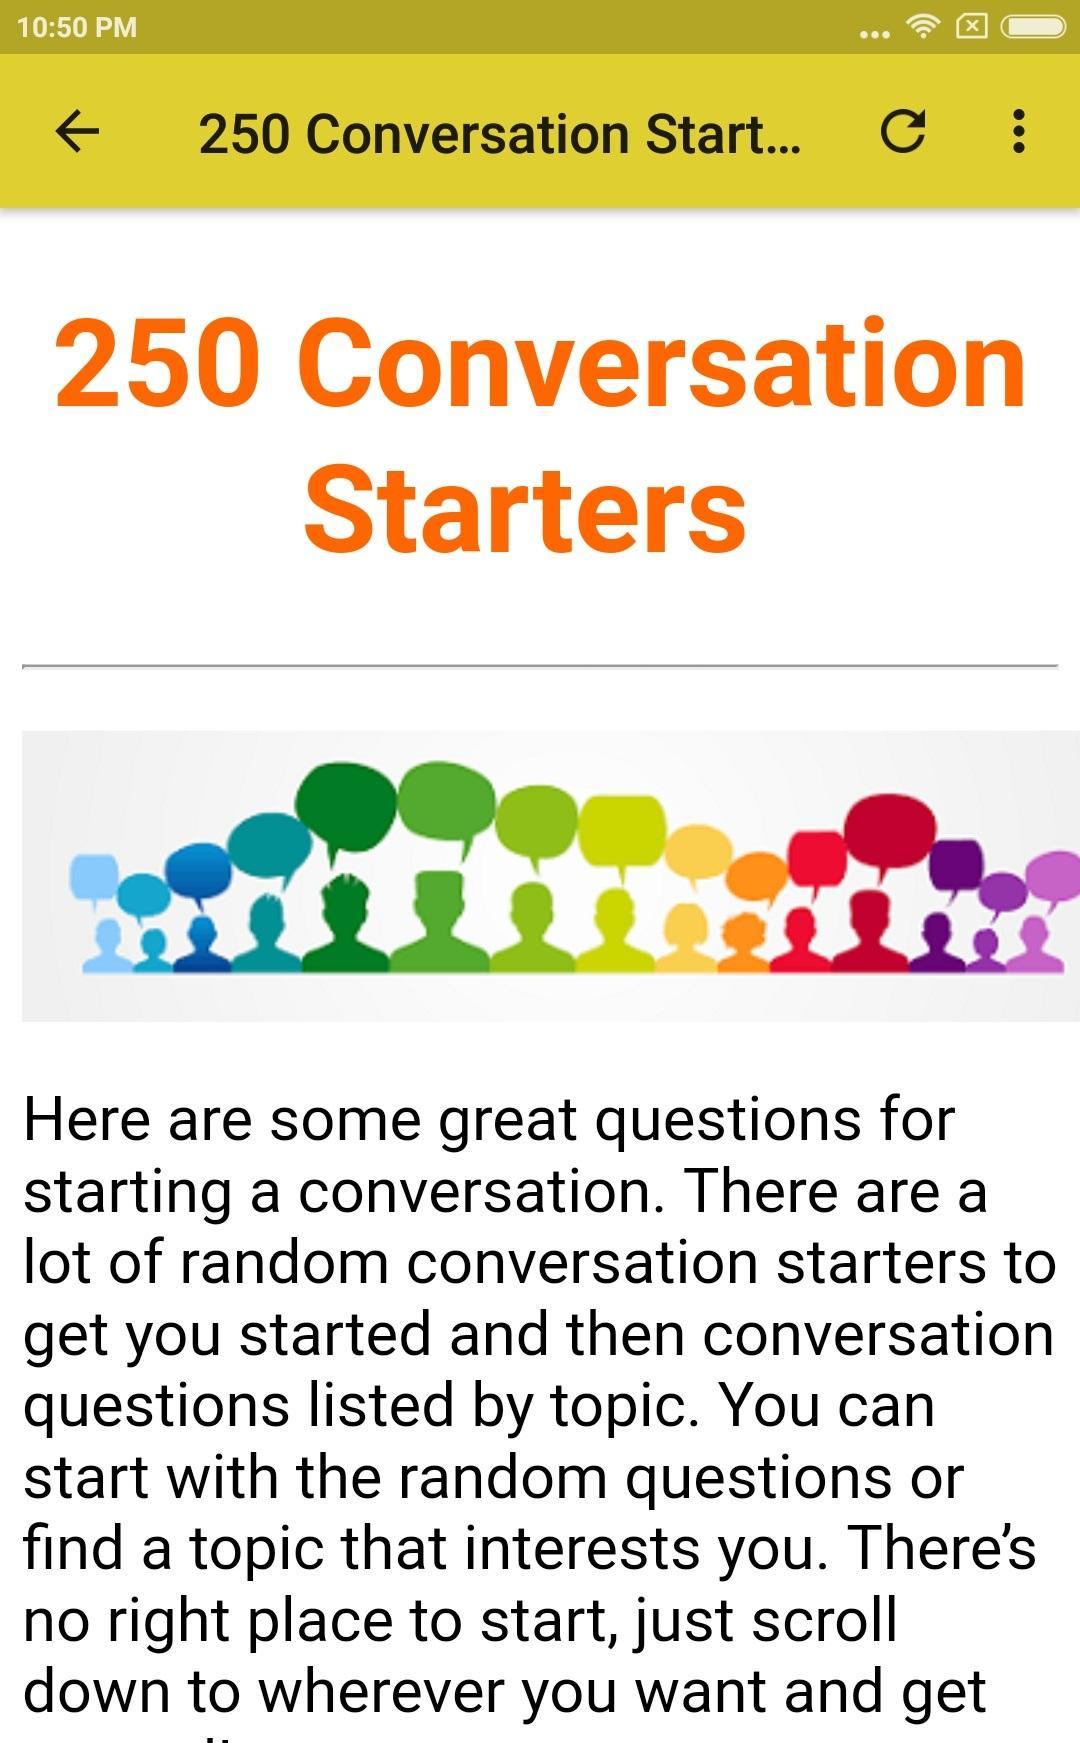 Good Conversation Starters for Android - APK Download